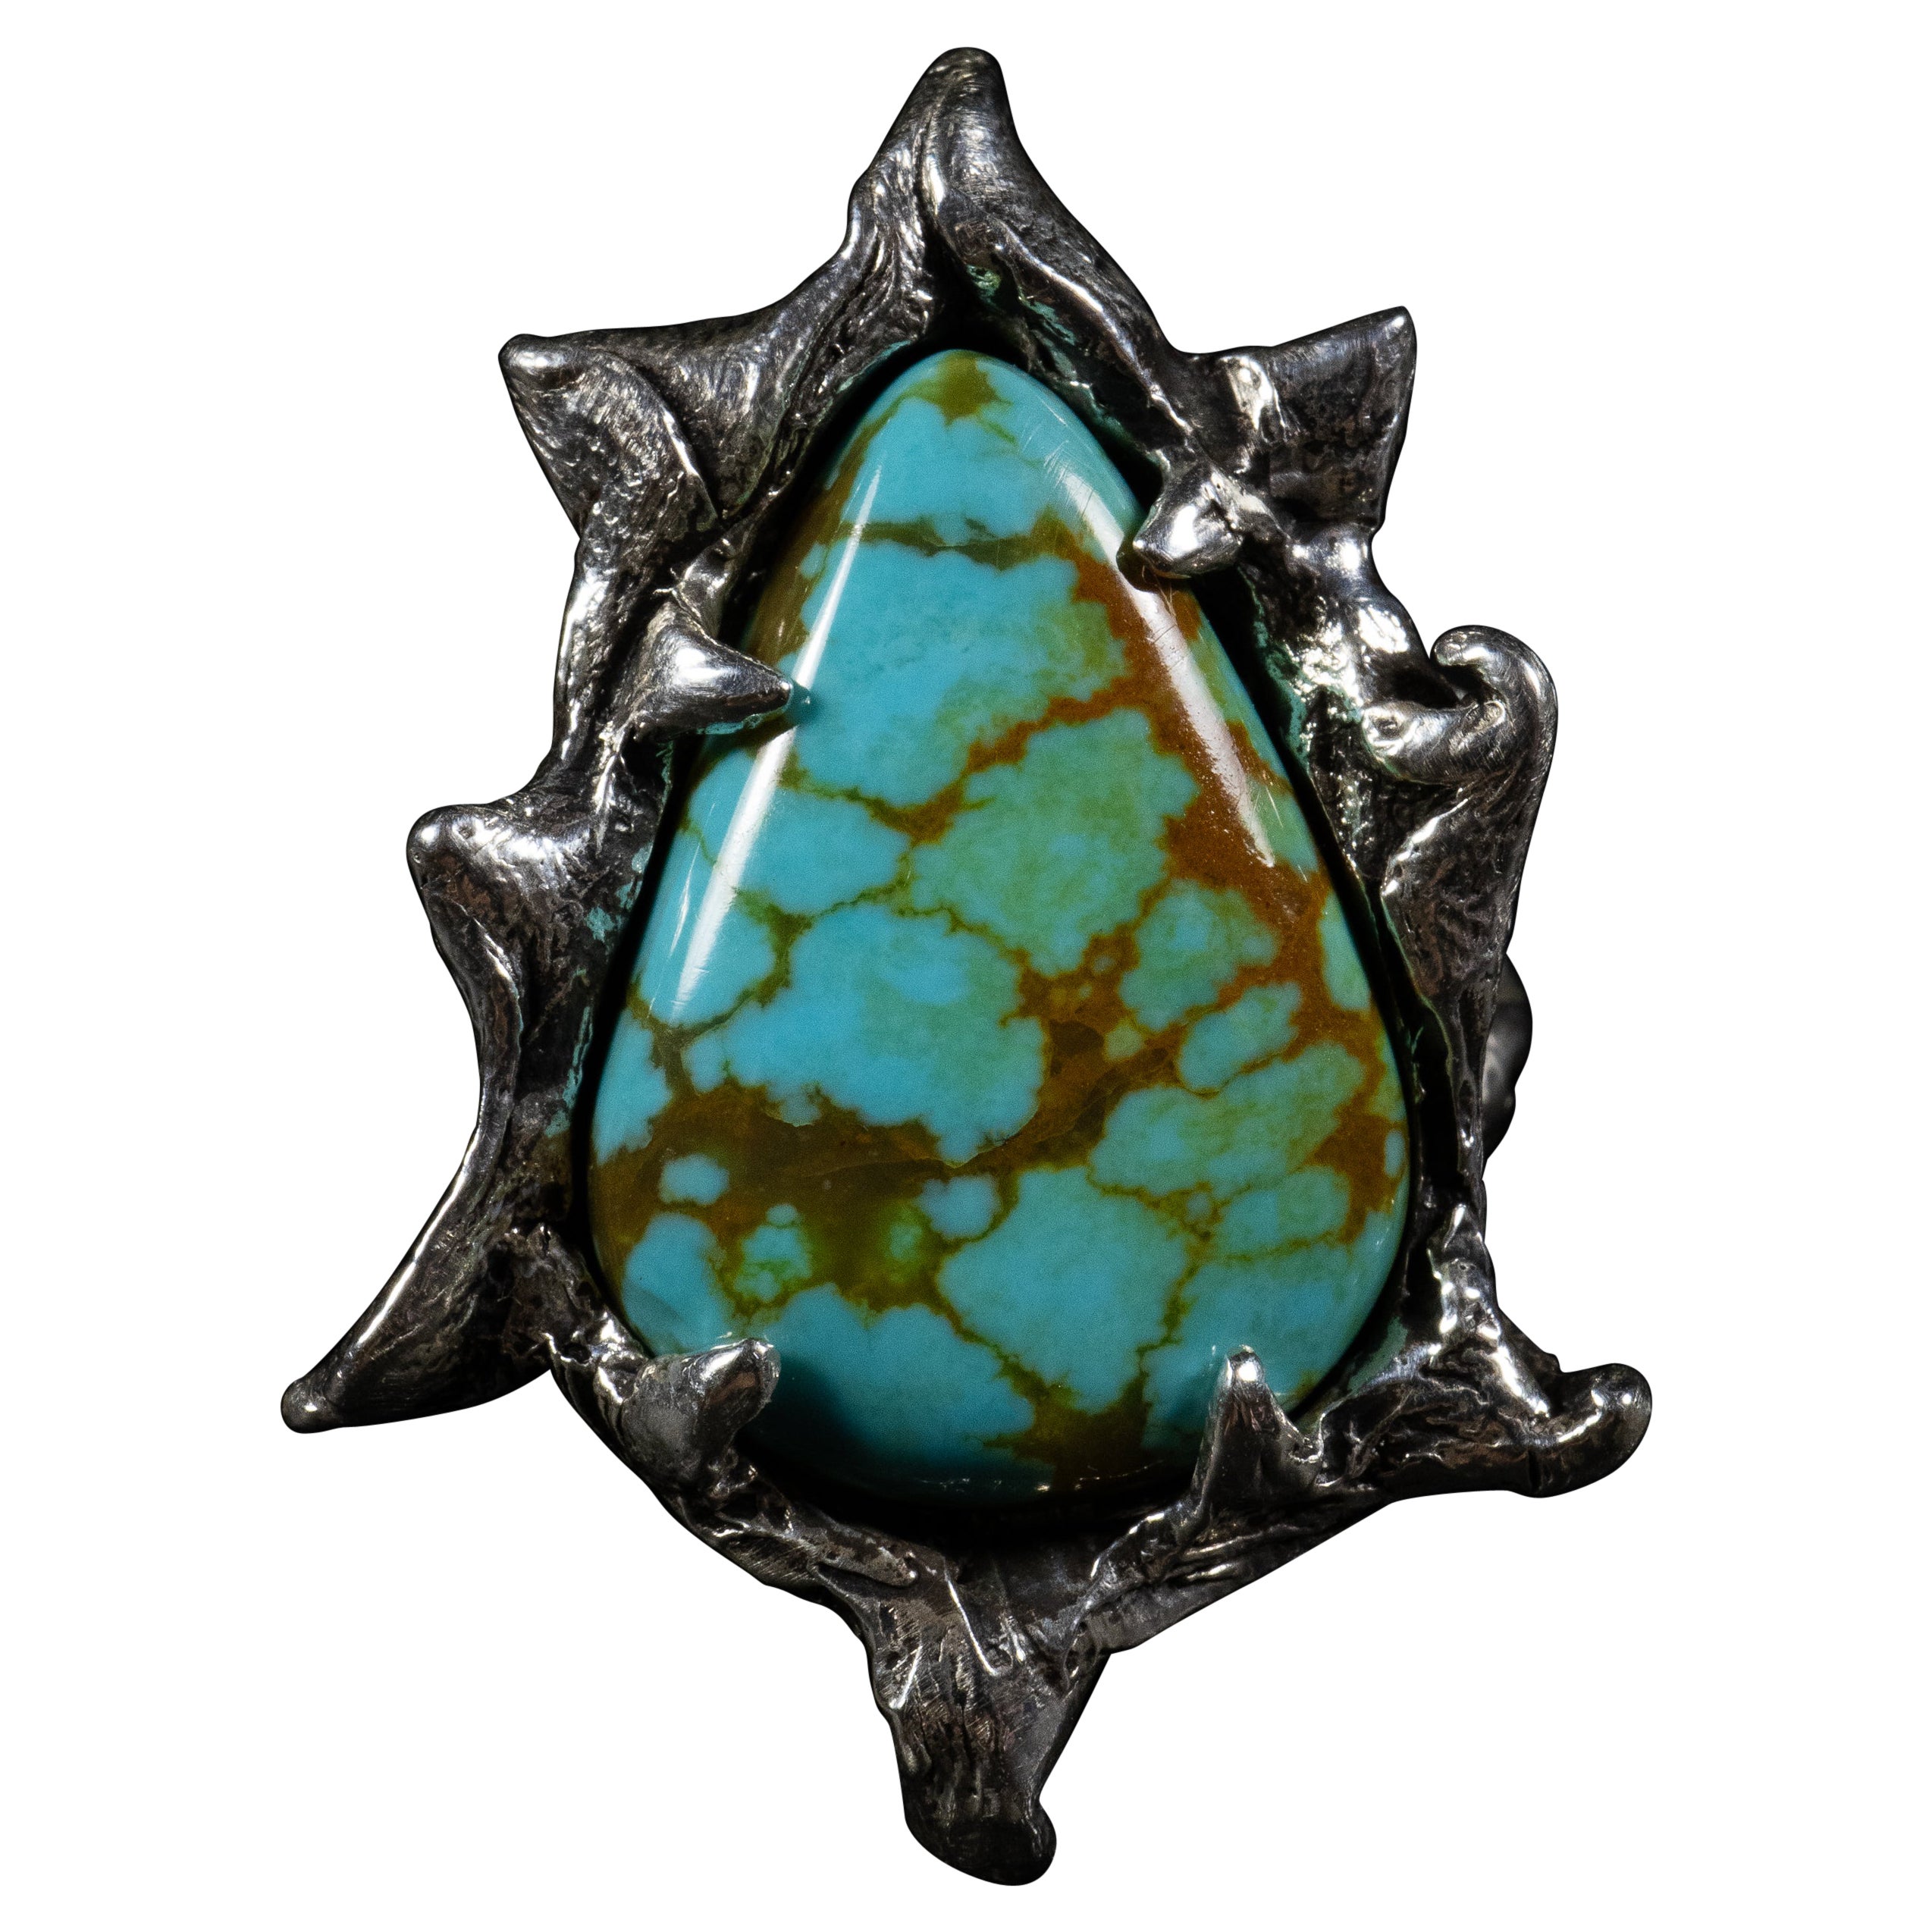 Genesis (Tyrone Turquoise, Sterling Silver Ring) by Ken Fury